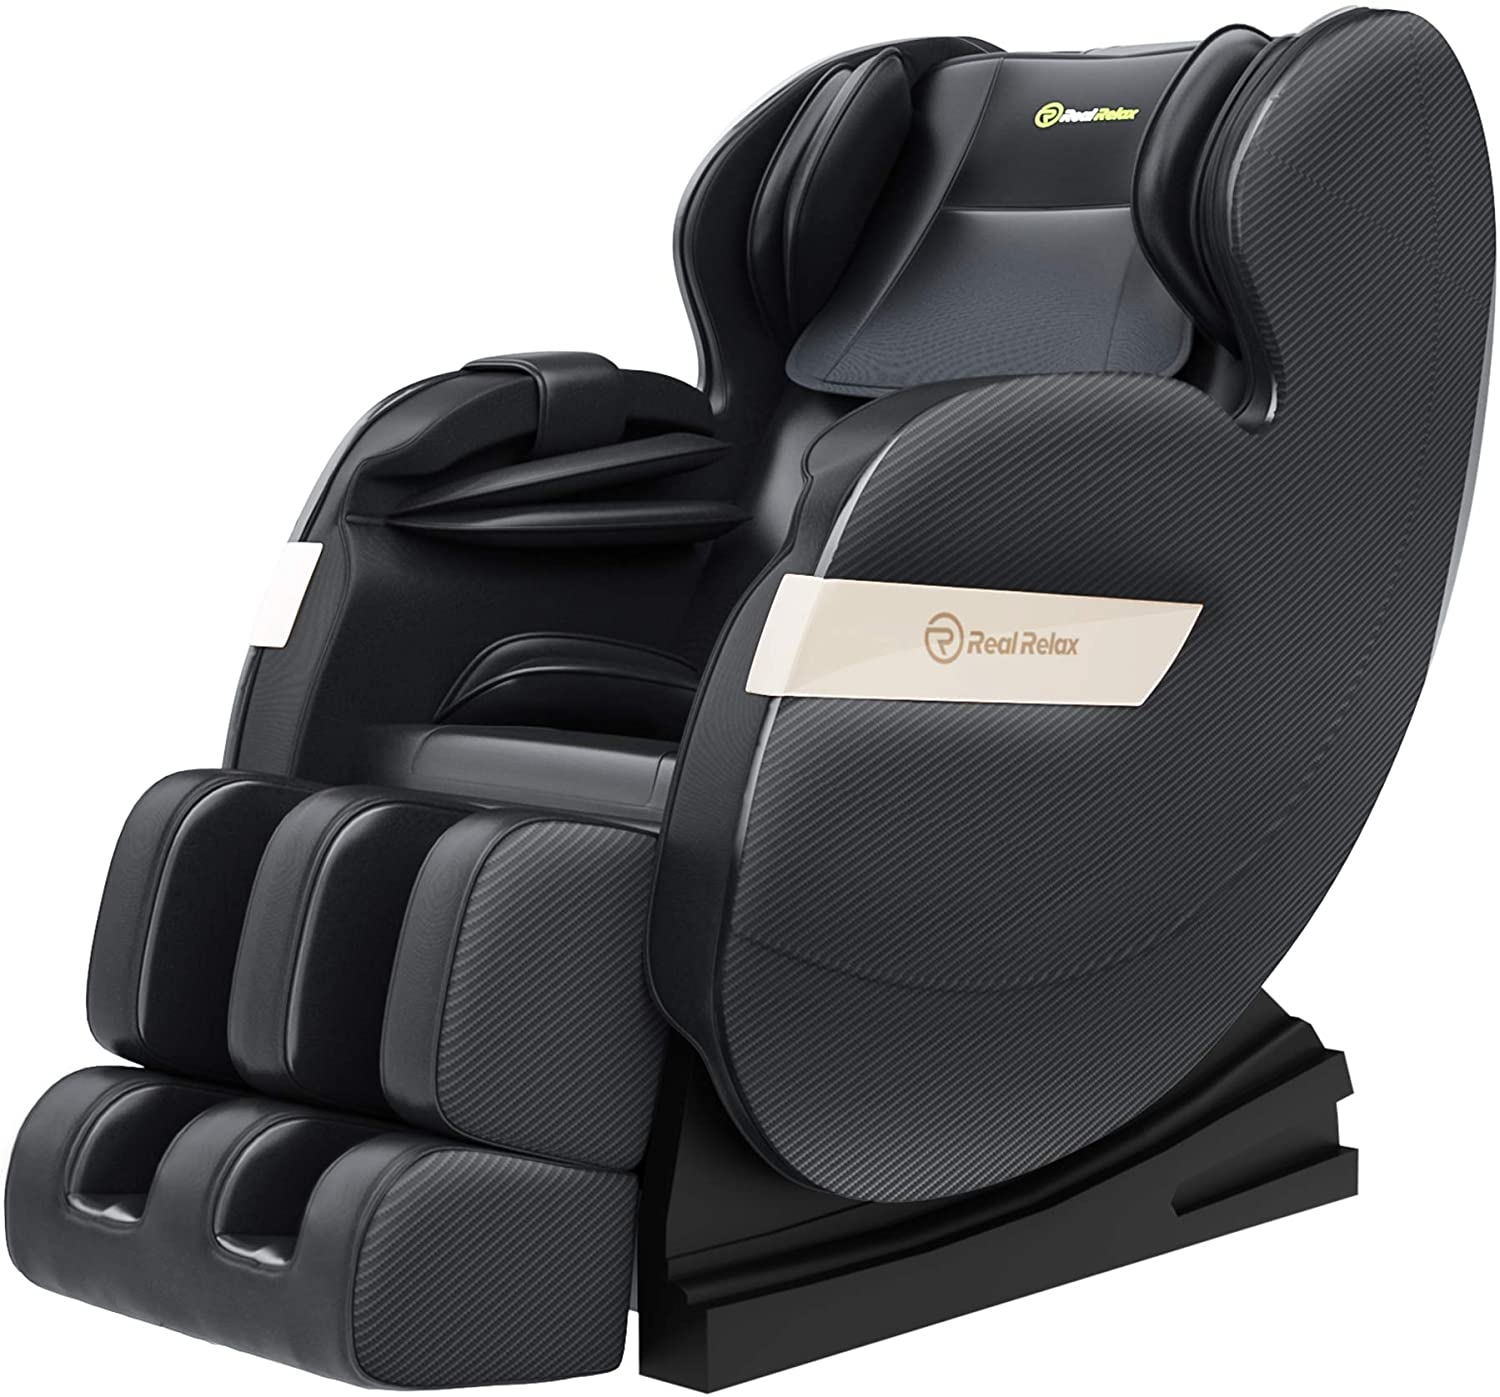 1. Real Relax Massage Chair